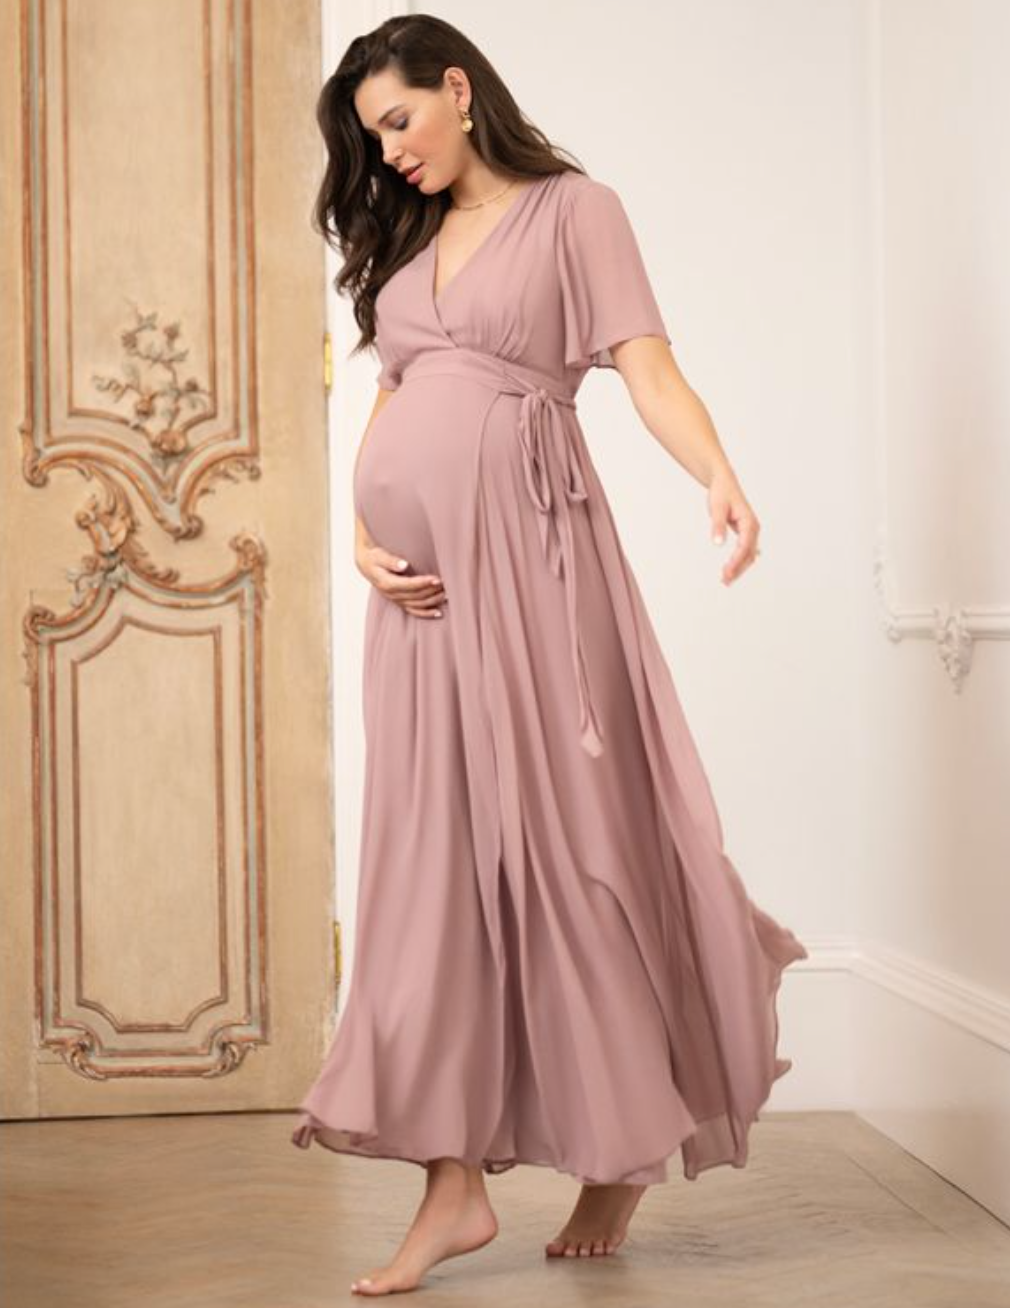 Maternity party dress with nursing access, Maternity dress / Nursing dress